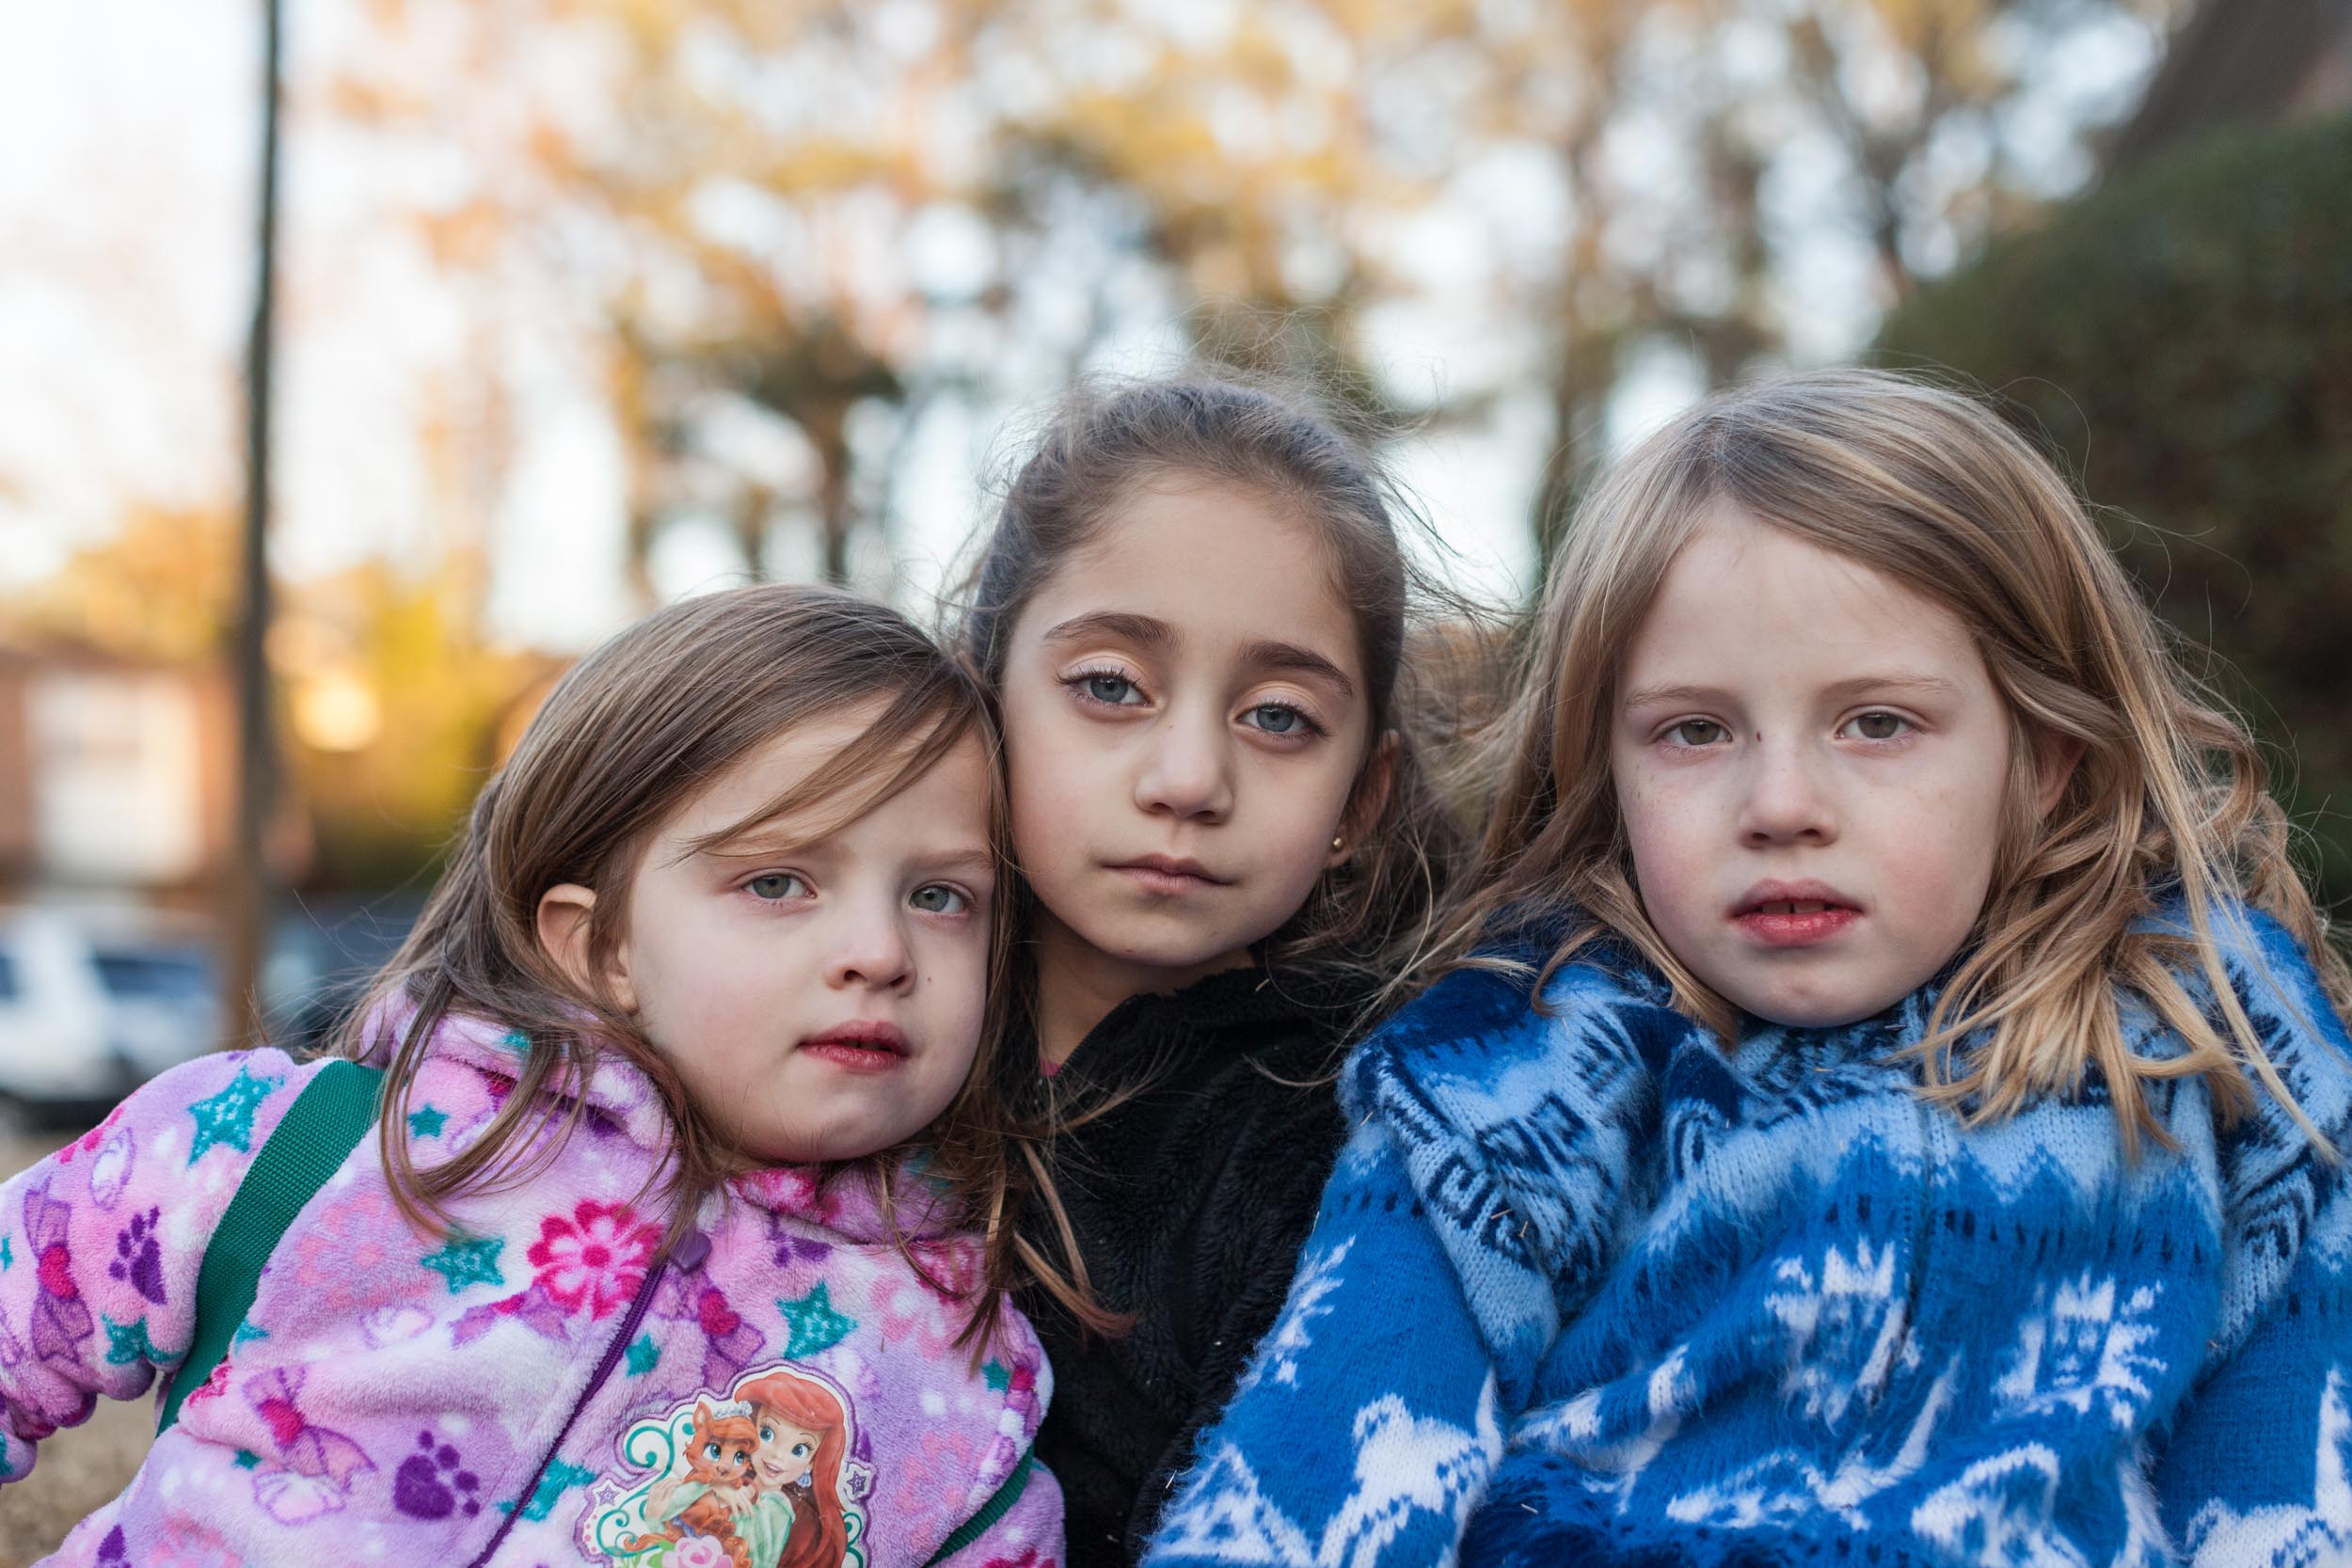  Joanna (center), a Syrian Kurd 19 months after her arrival to America sits with her neighbors, Maddie and Hannah, now best friends (2015). 